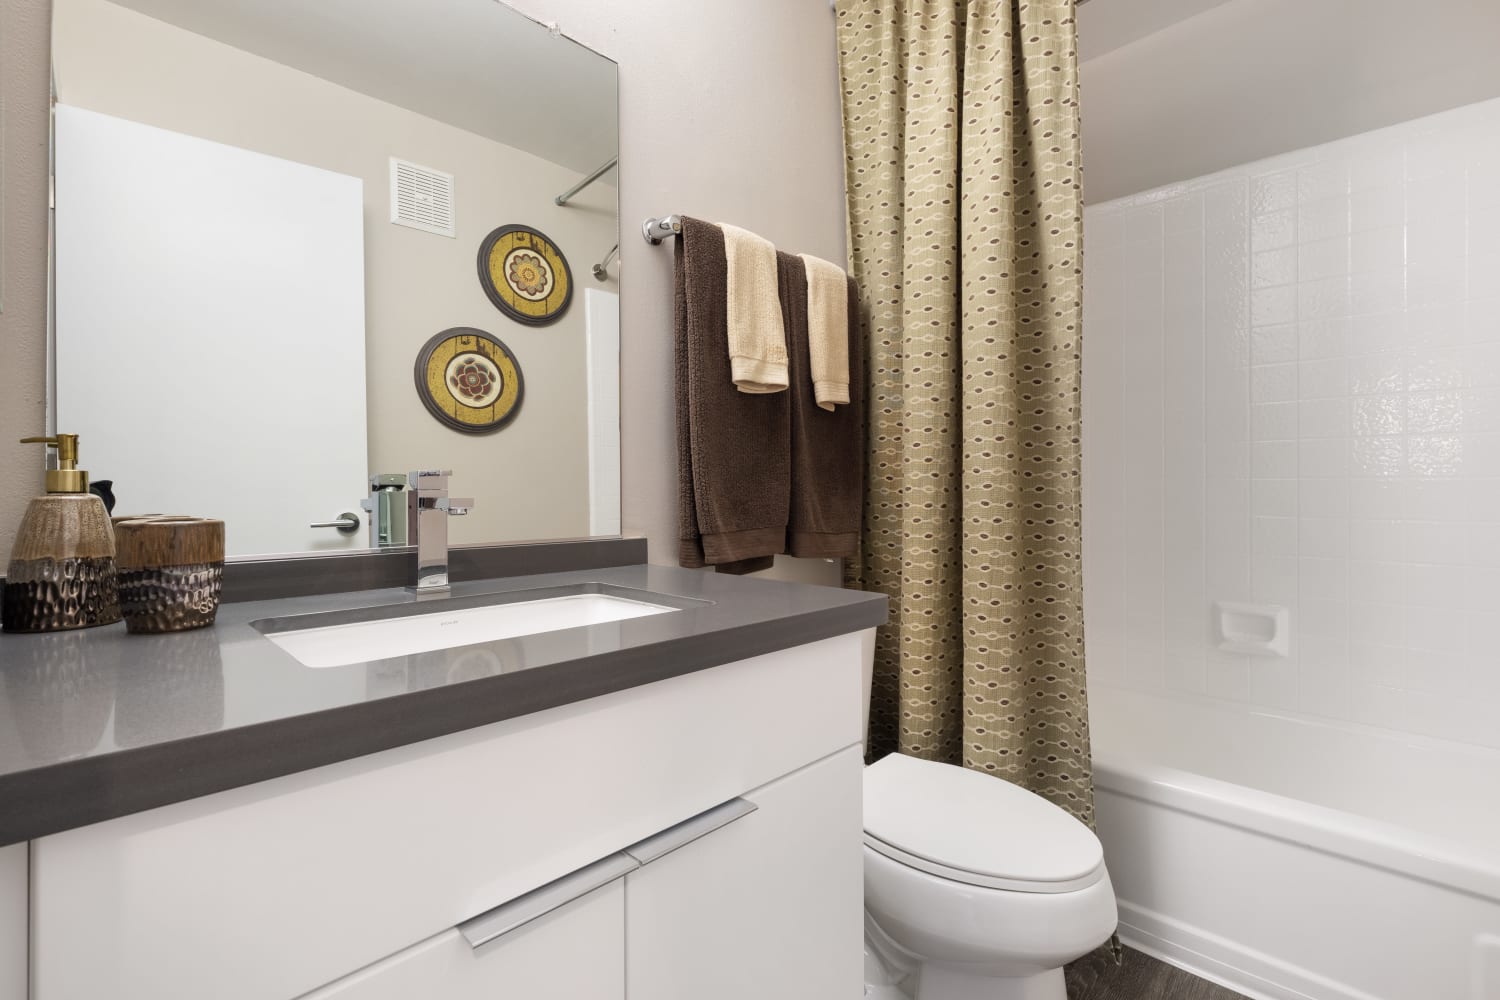 Modern decorated bathroom at Harbor Cove Apartments in Foster City, California